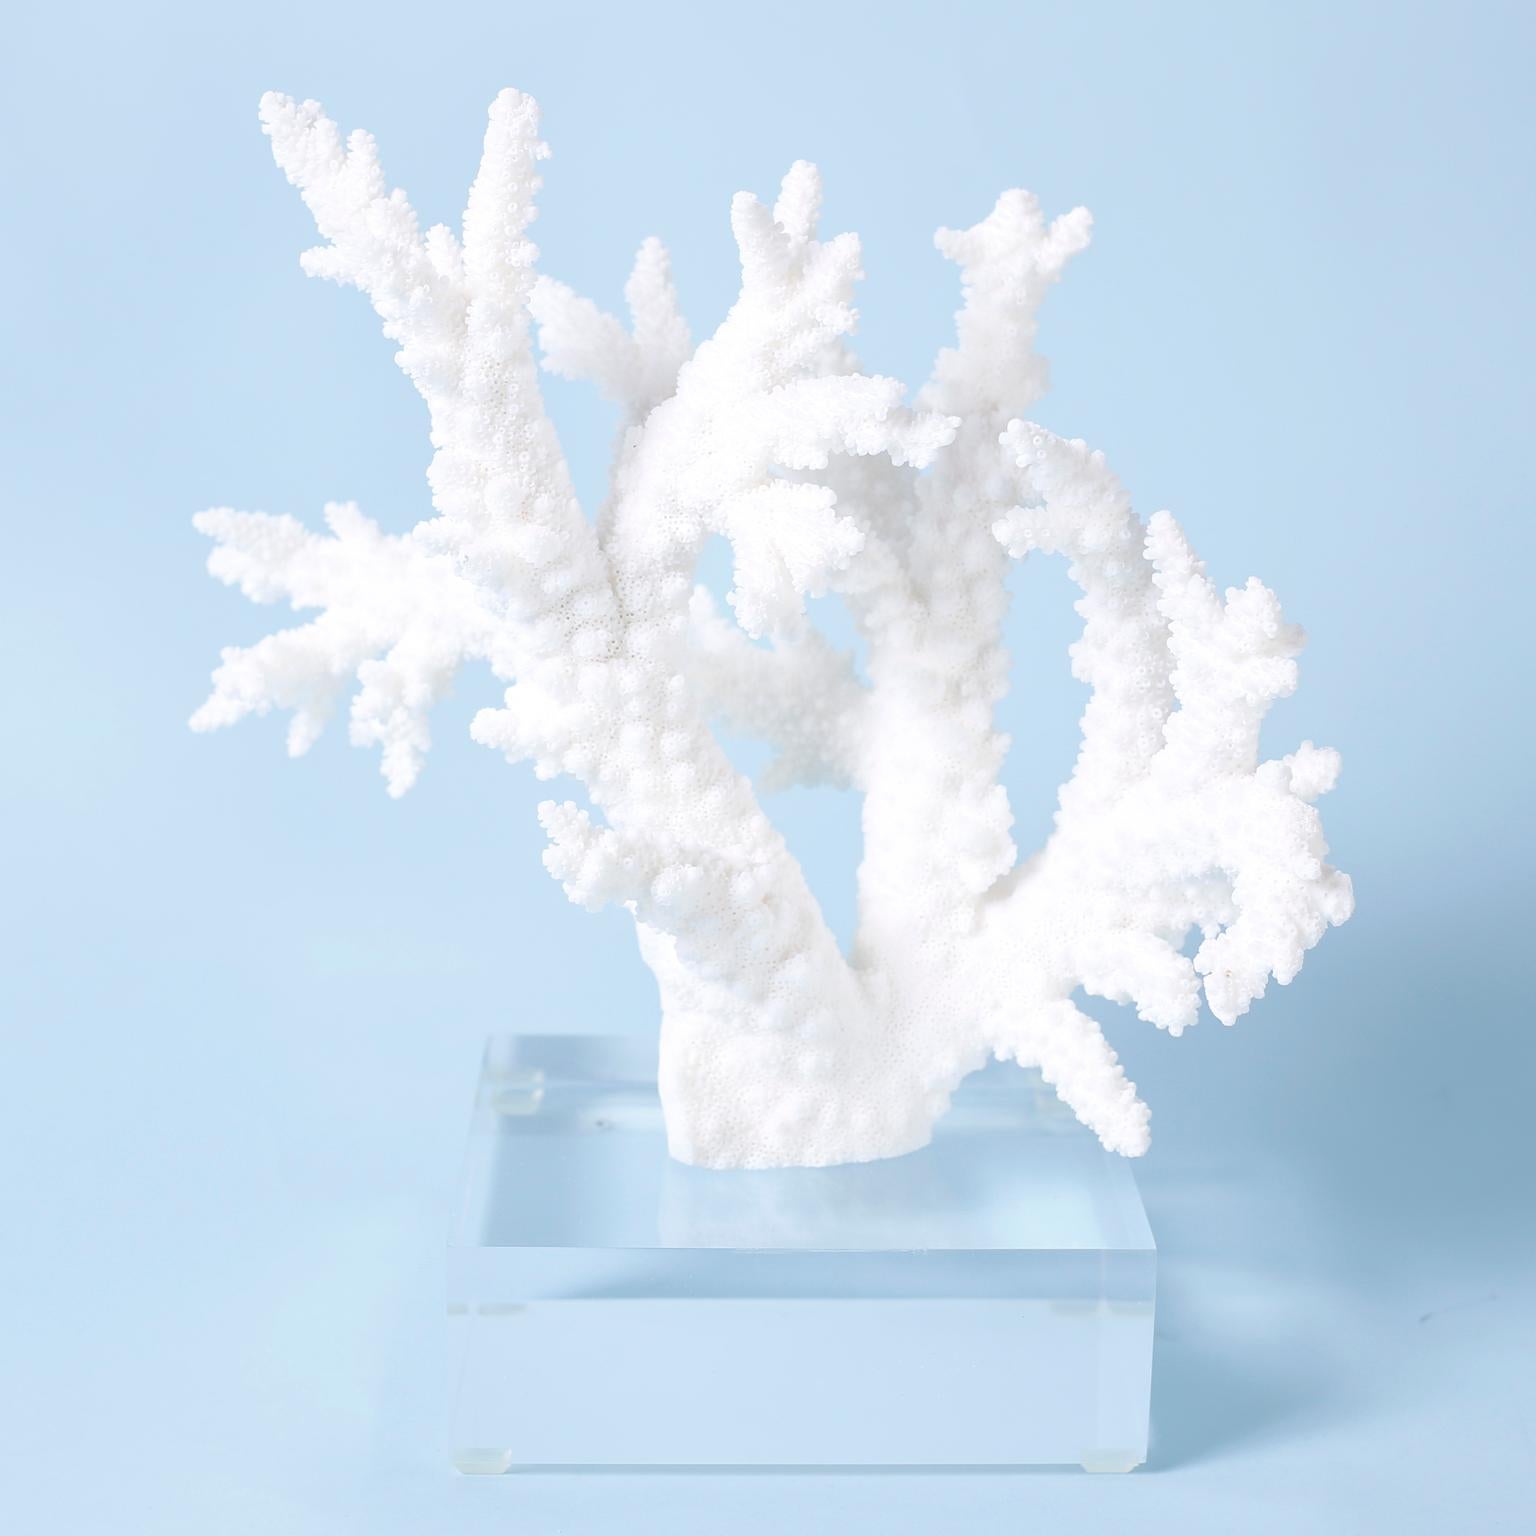 Three organic branch coral specimens each with its own bleached white color and unique sea inspired form and texture, presented on Lucite bases to enhance the sculptural elements.

Measures: Left D 90, H 11.5, W 10, D 7

Middle D 91, H 12.5, W